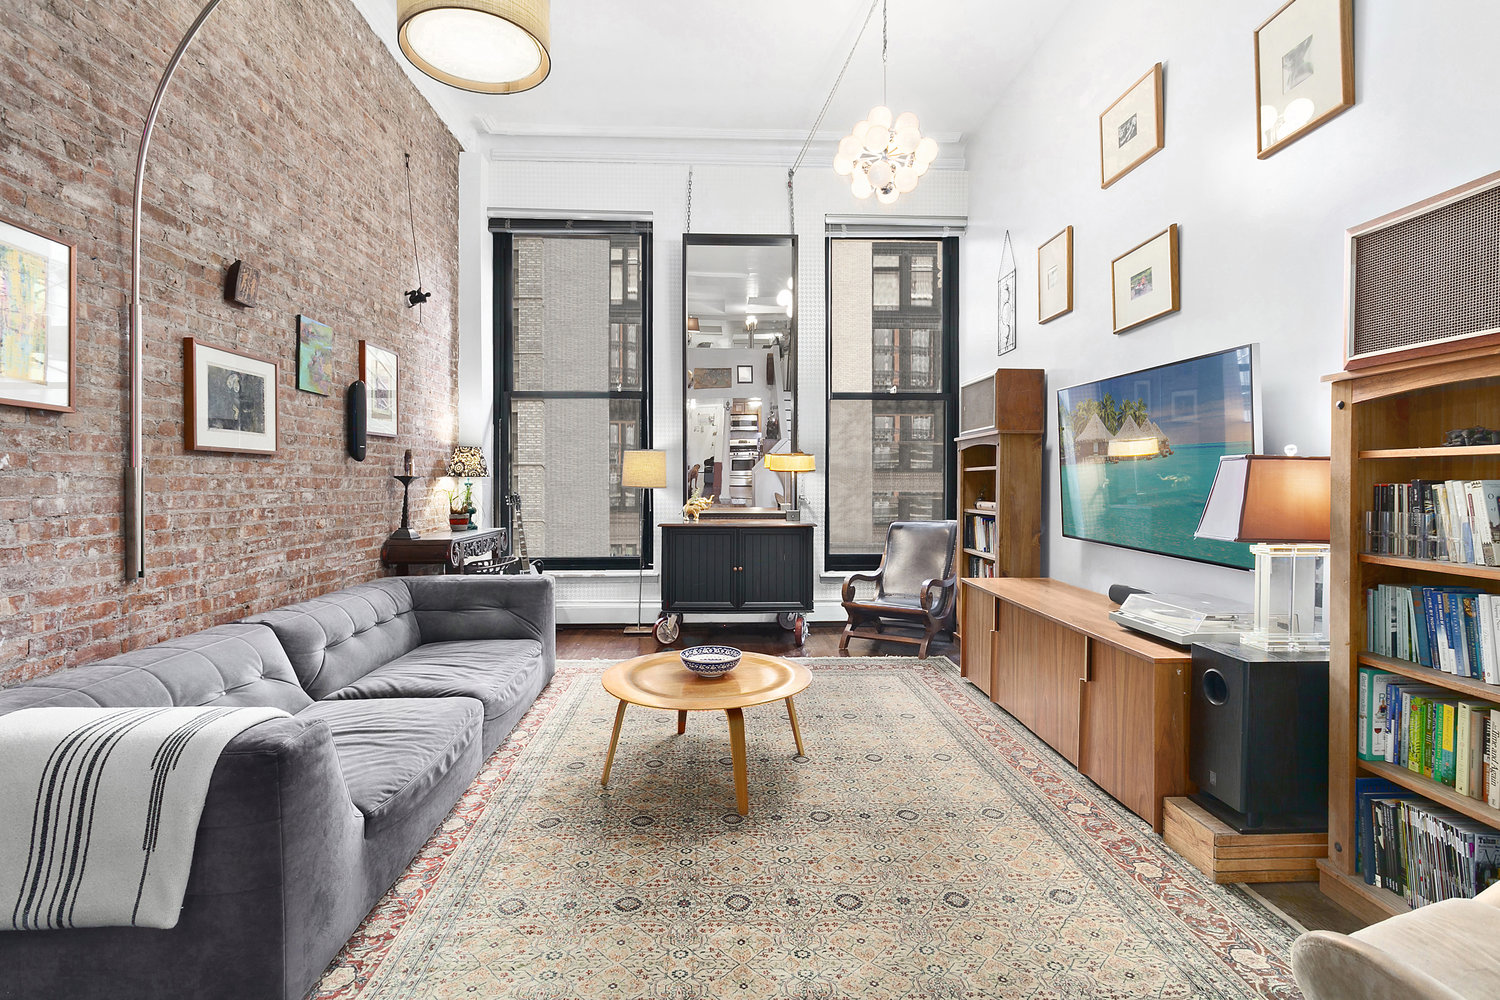 A 1,033 square foot one bedroom loft that checks all the boxes: location, amenities, exposed brick, charm, closet space and fully renovated! First open house will be Sunday, March 24th from 12-130pm. Read More &gt;